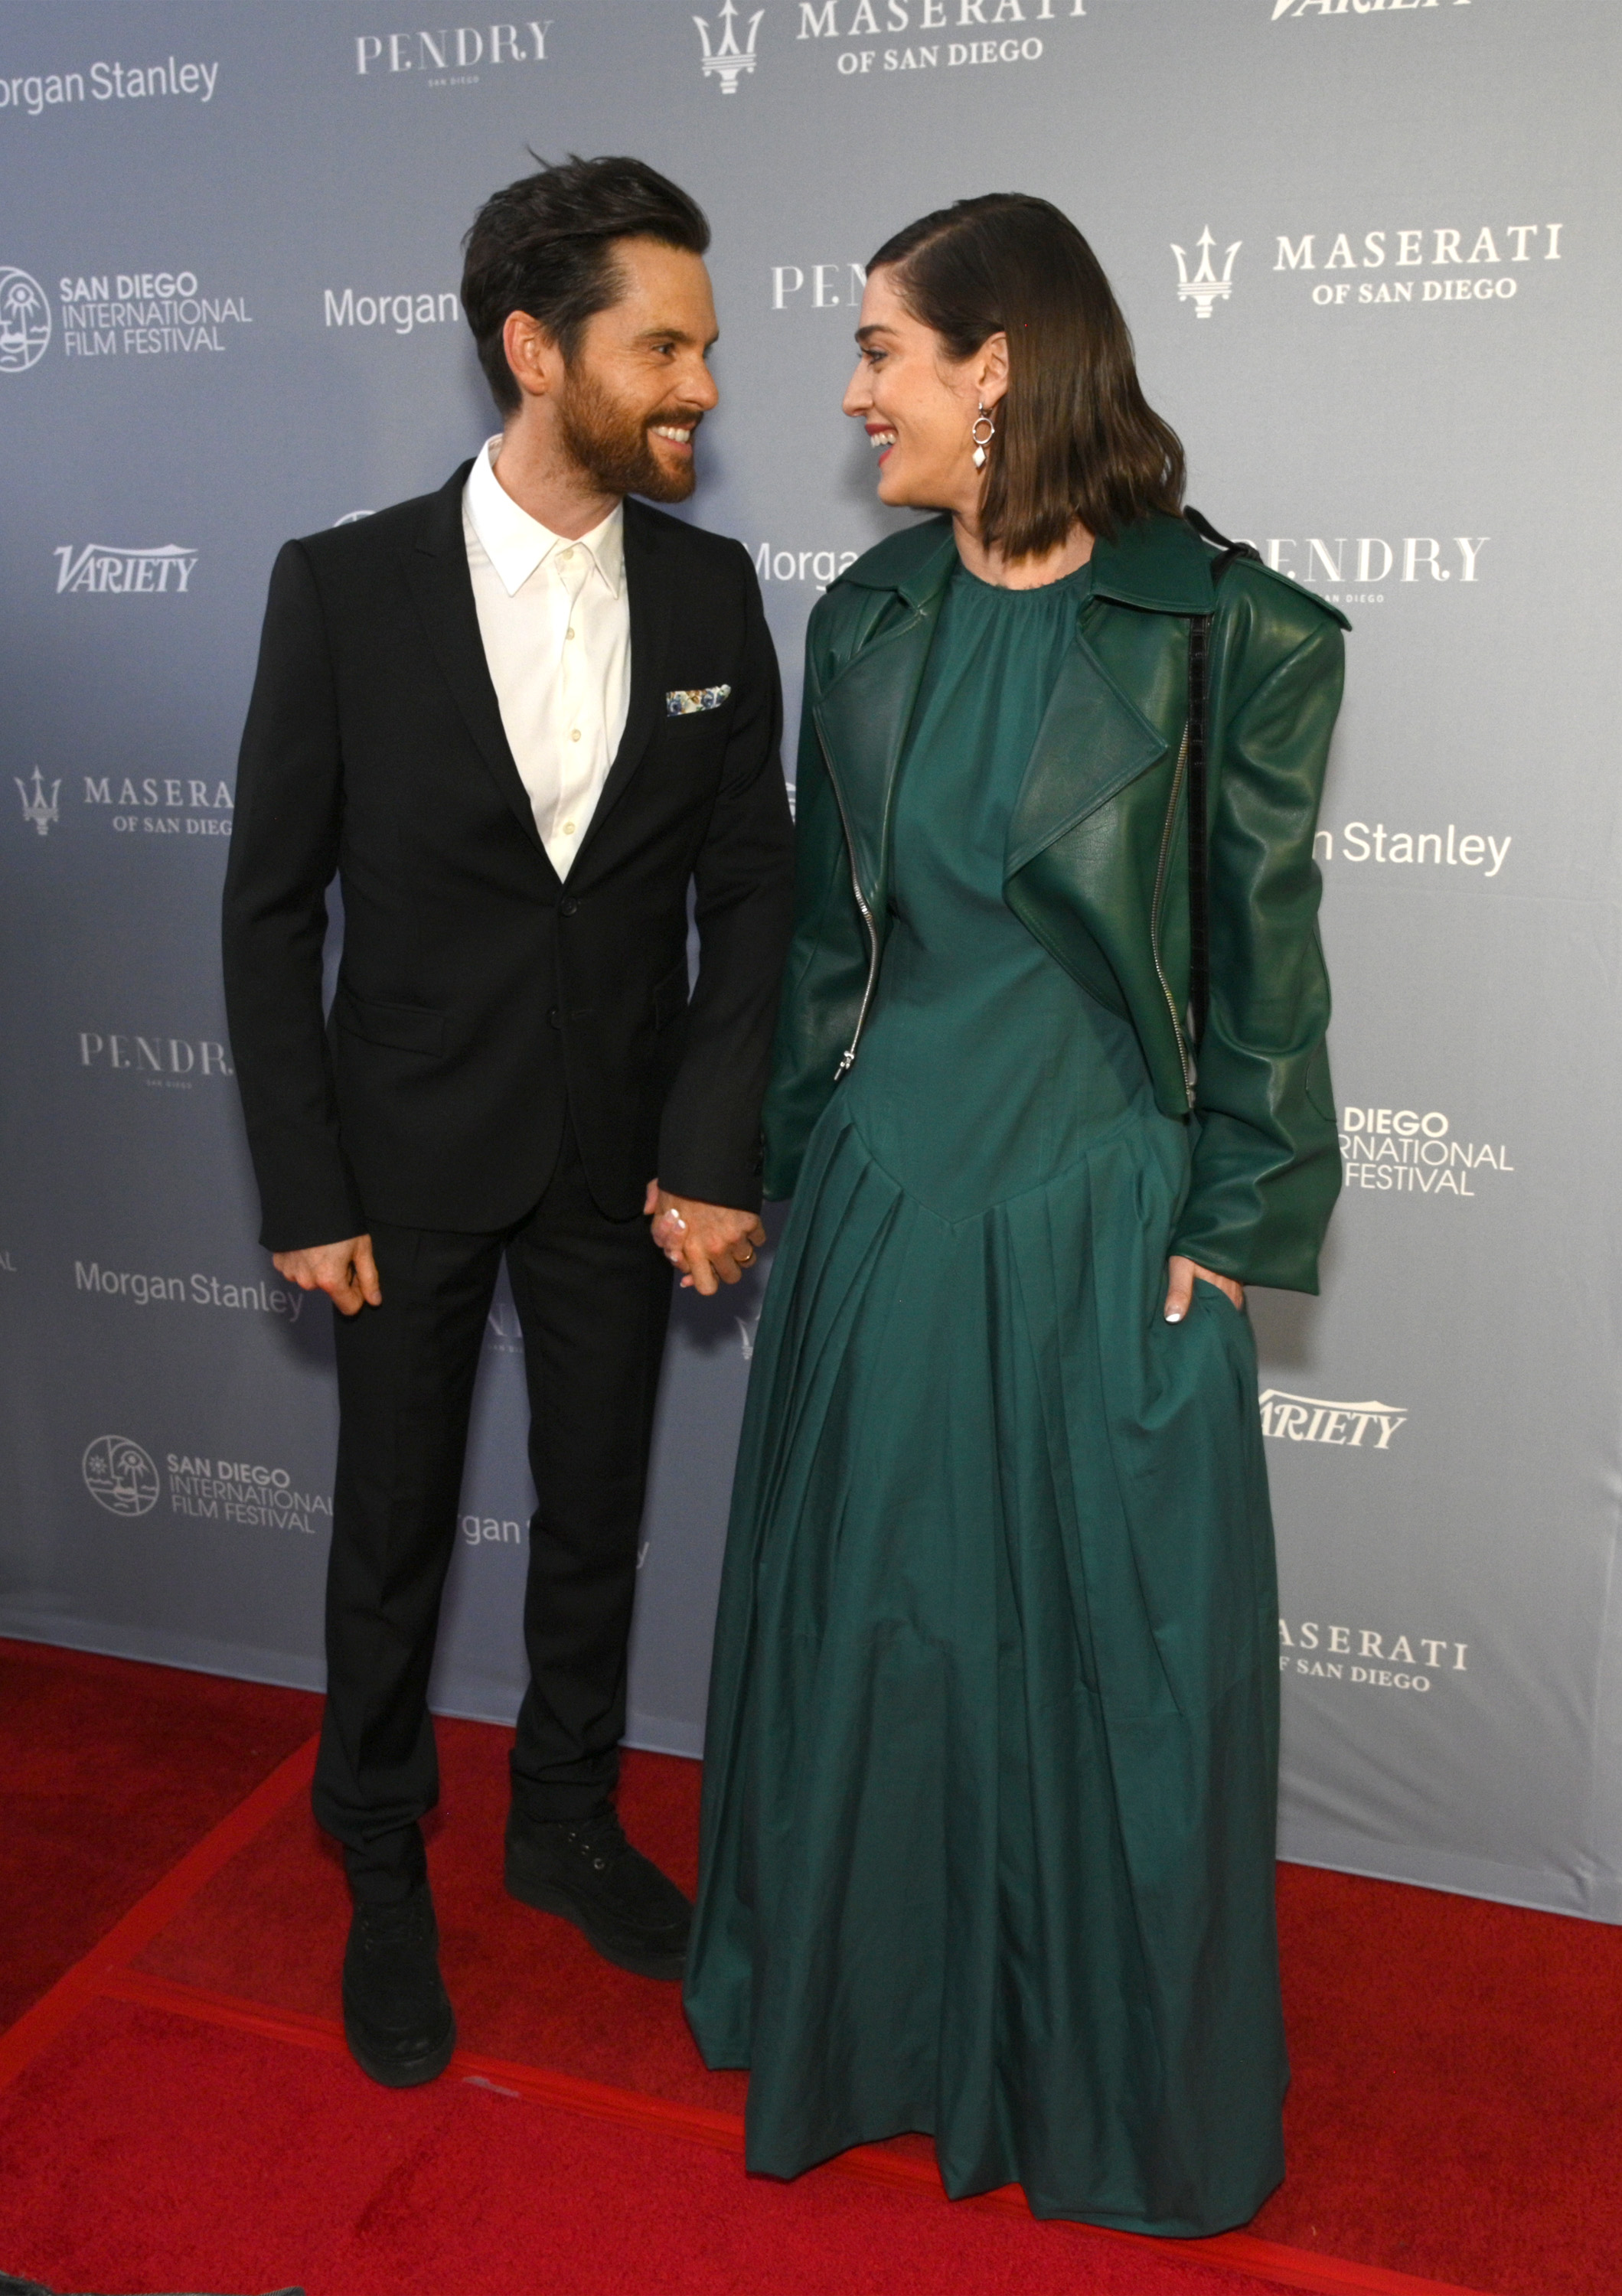 Tom Riley and Lizzy Caplan during the San Diego International Film Festival at Pendry San Diego on October 18, 2019, in San Diego, California. | Source: Getty Images